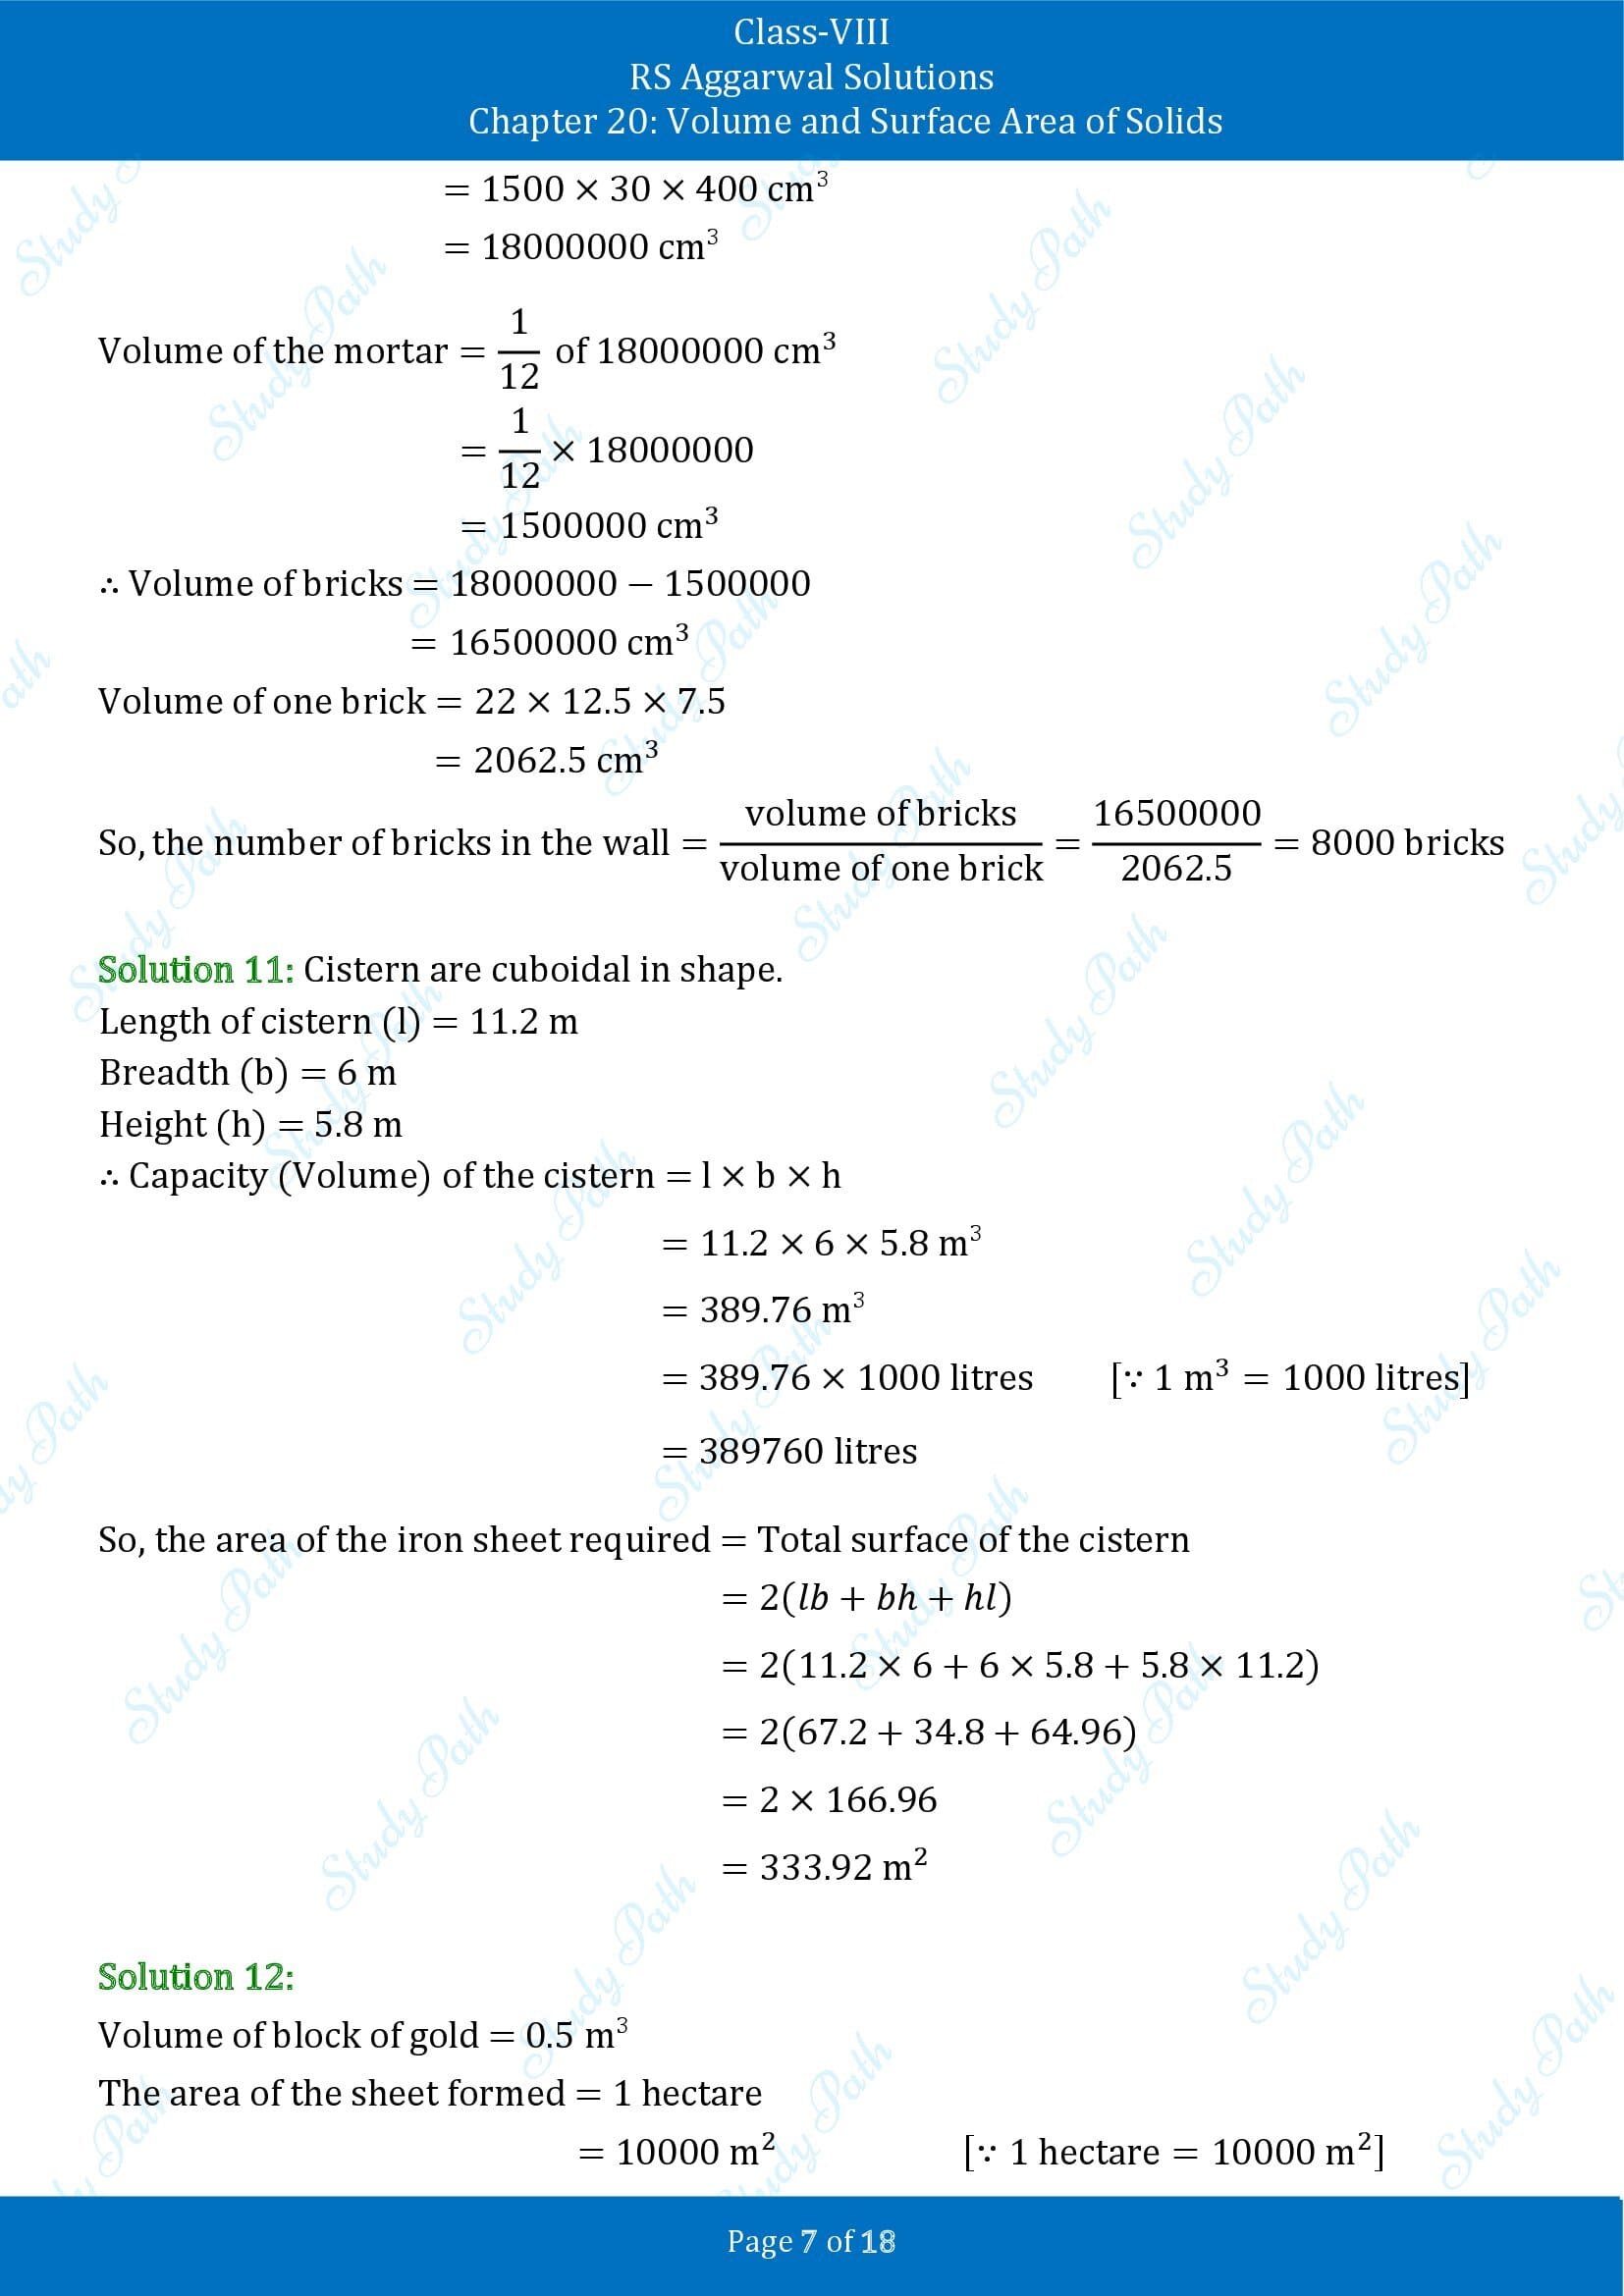 RS Aggarwal Solutions Class 8 Chapter 20 Volume and Surface Area of Solids Exercise 20A 00007